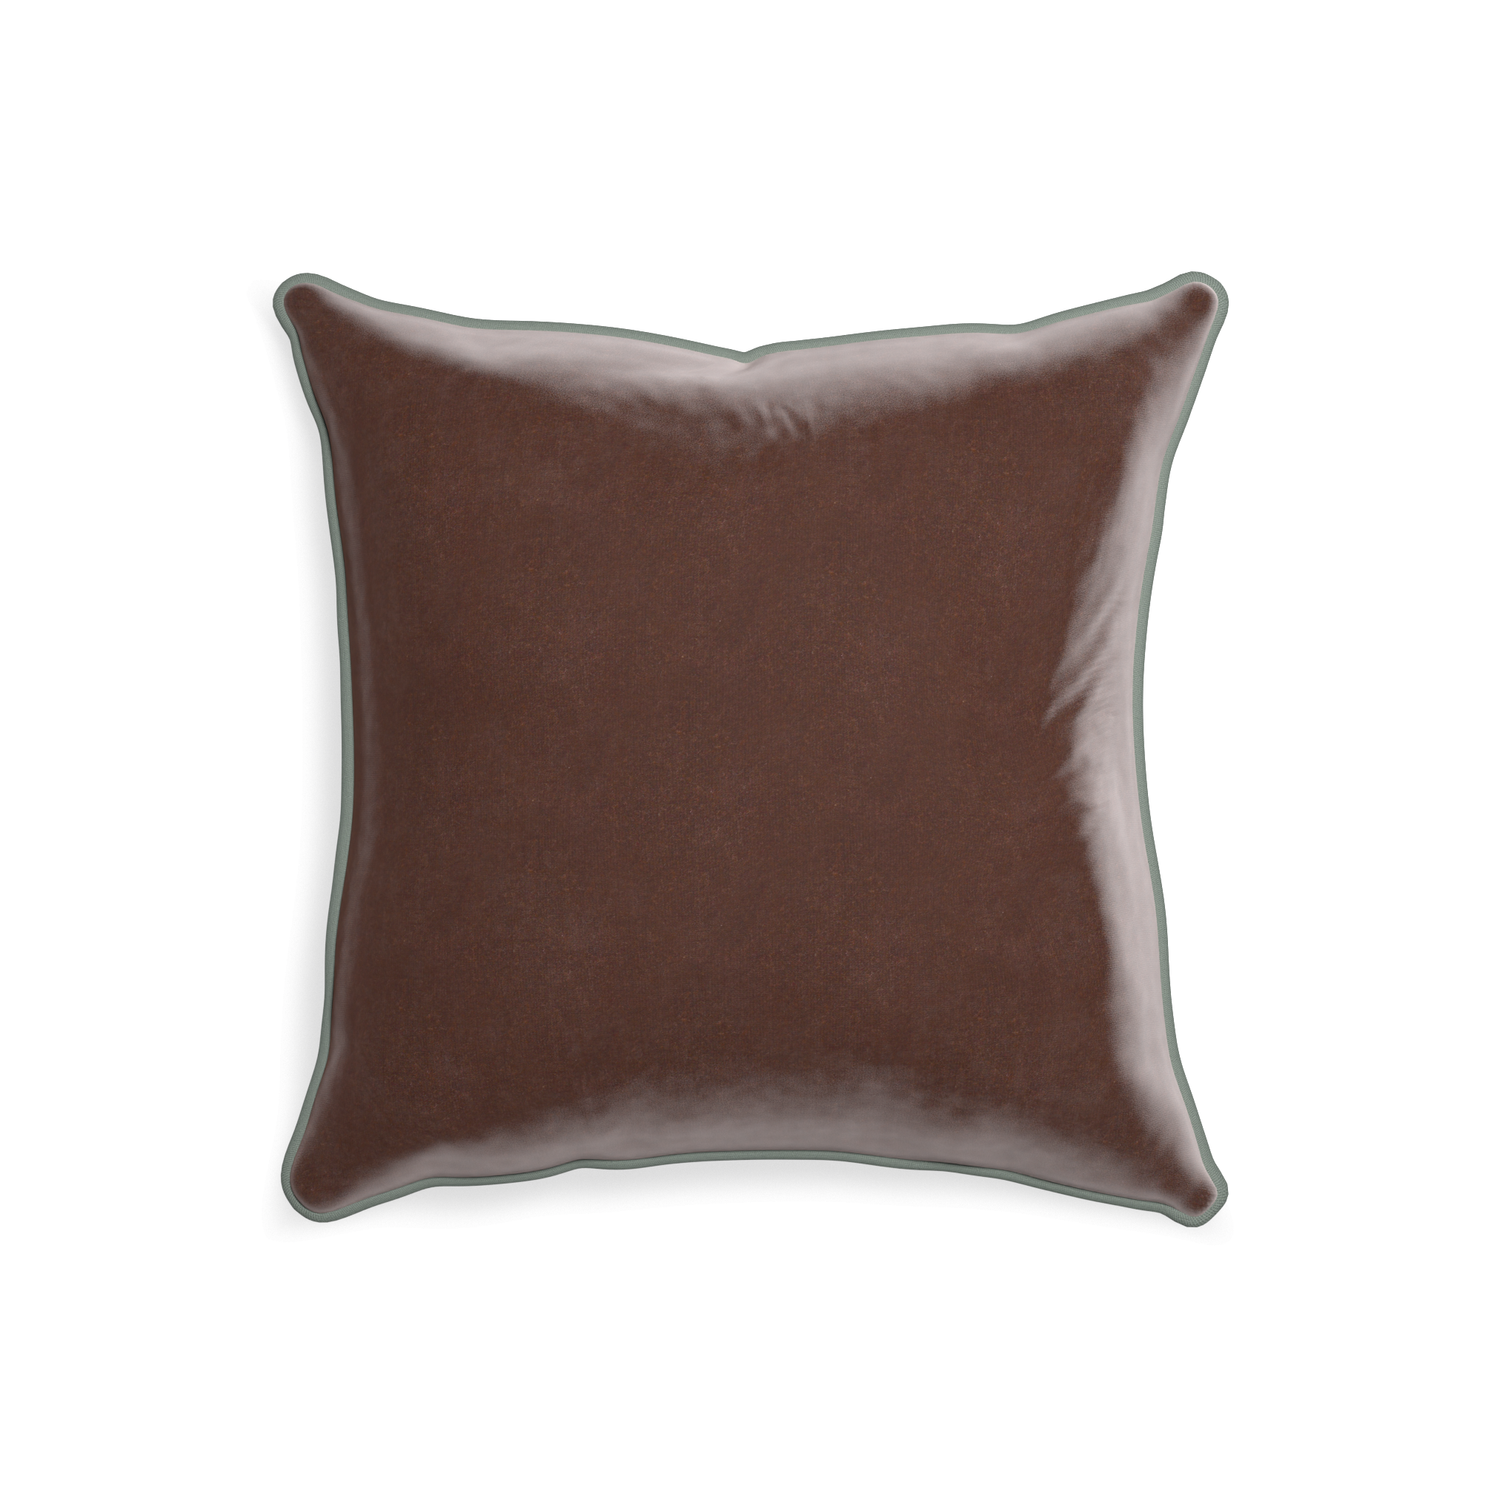 20-square walnut velvet custom brownpillow with sage piping on white background